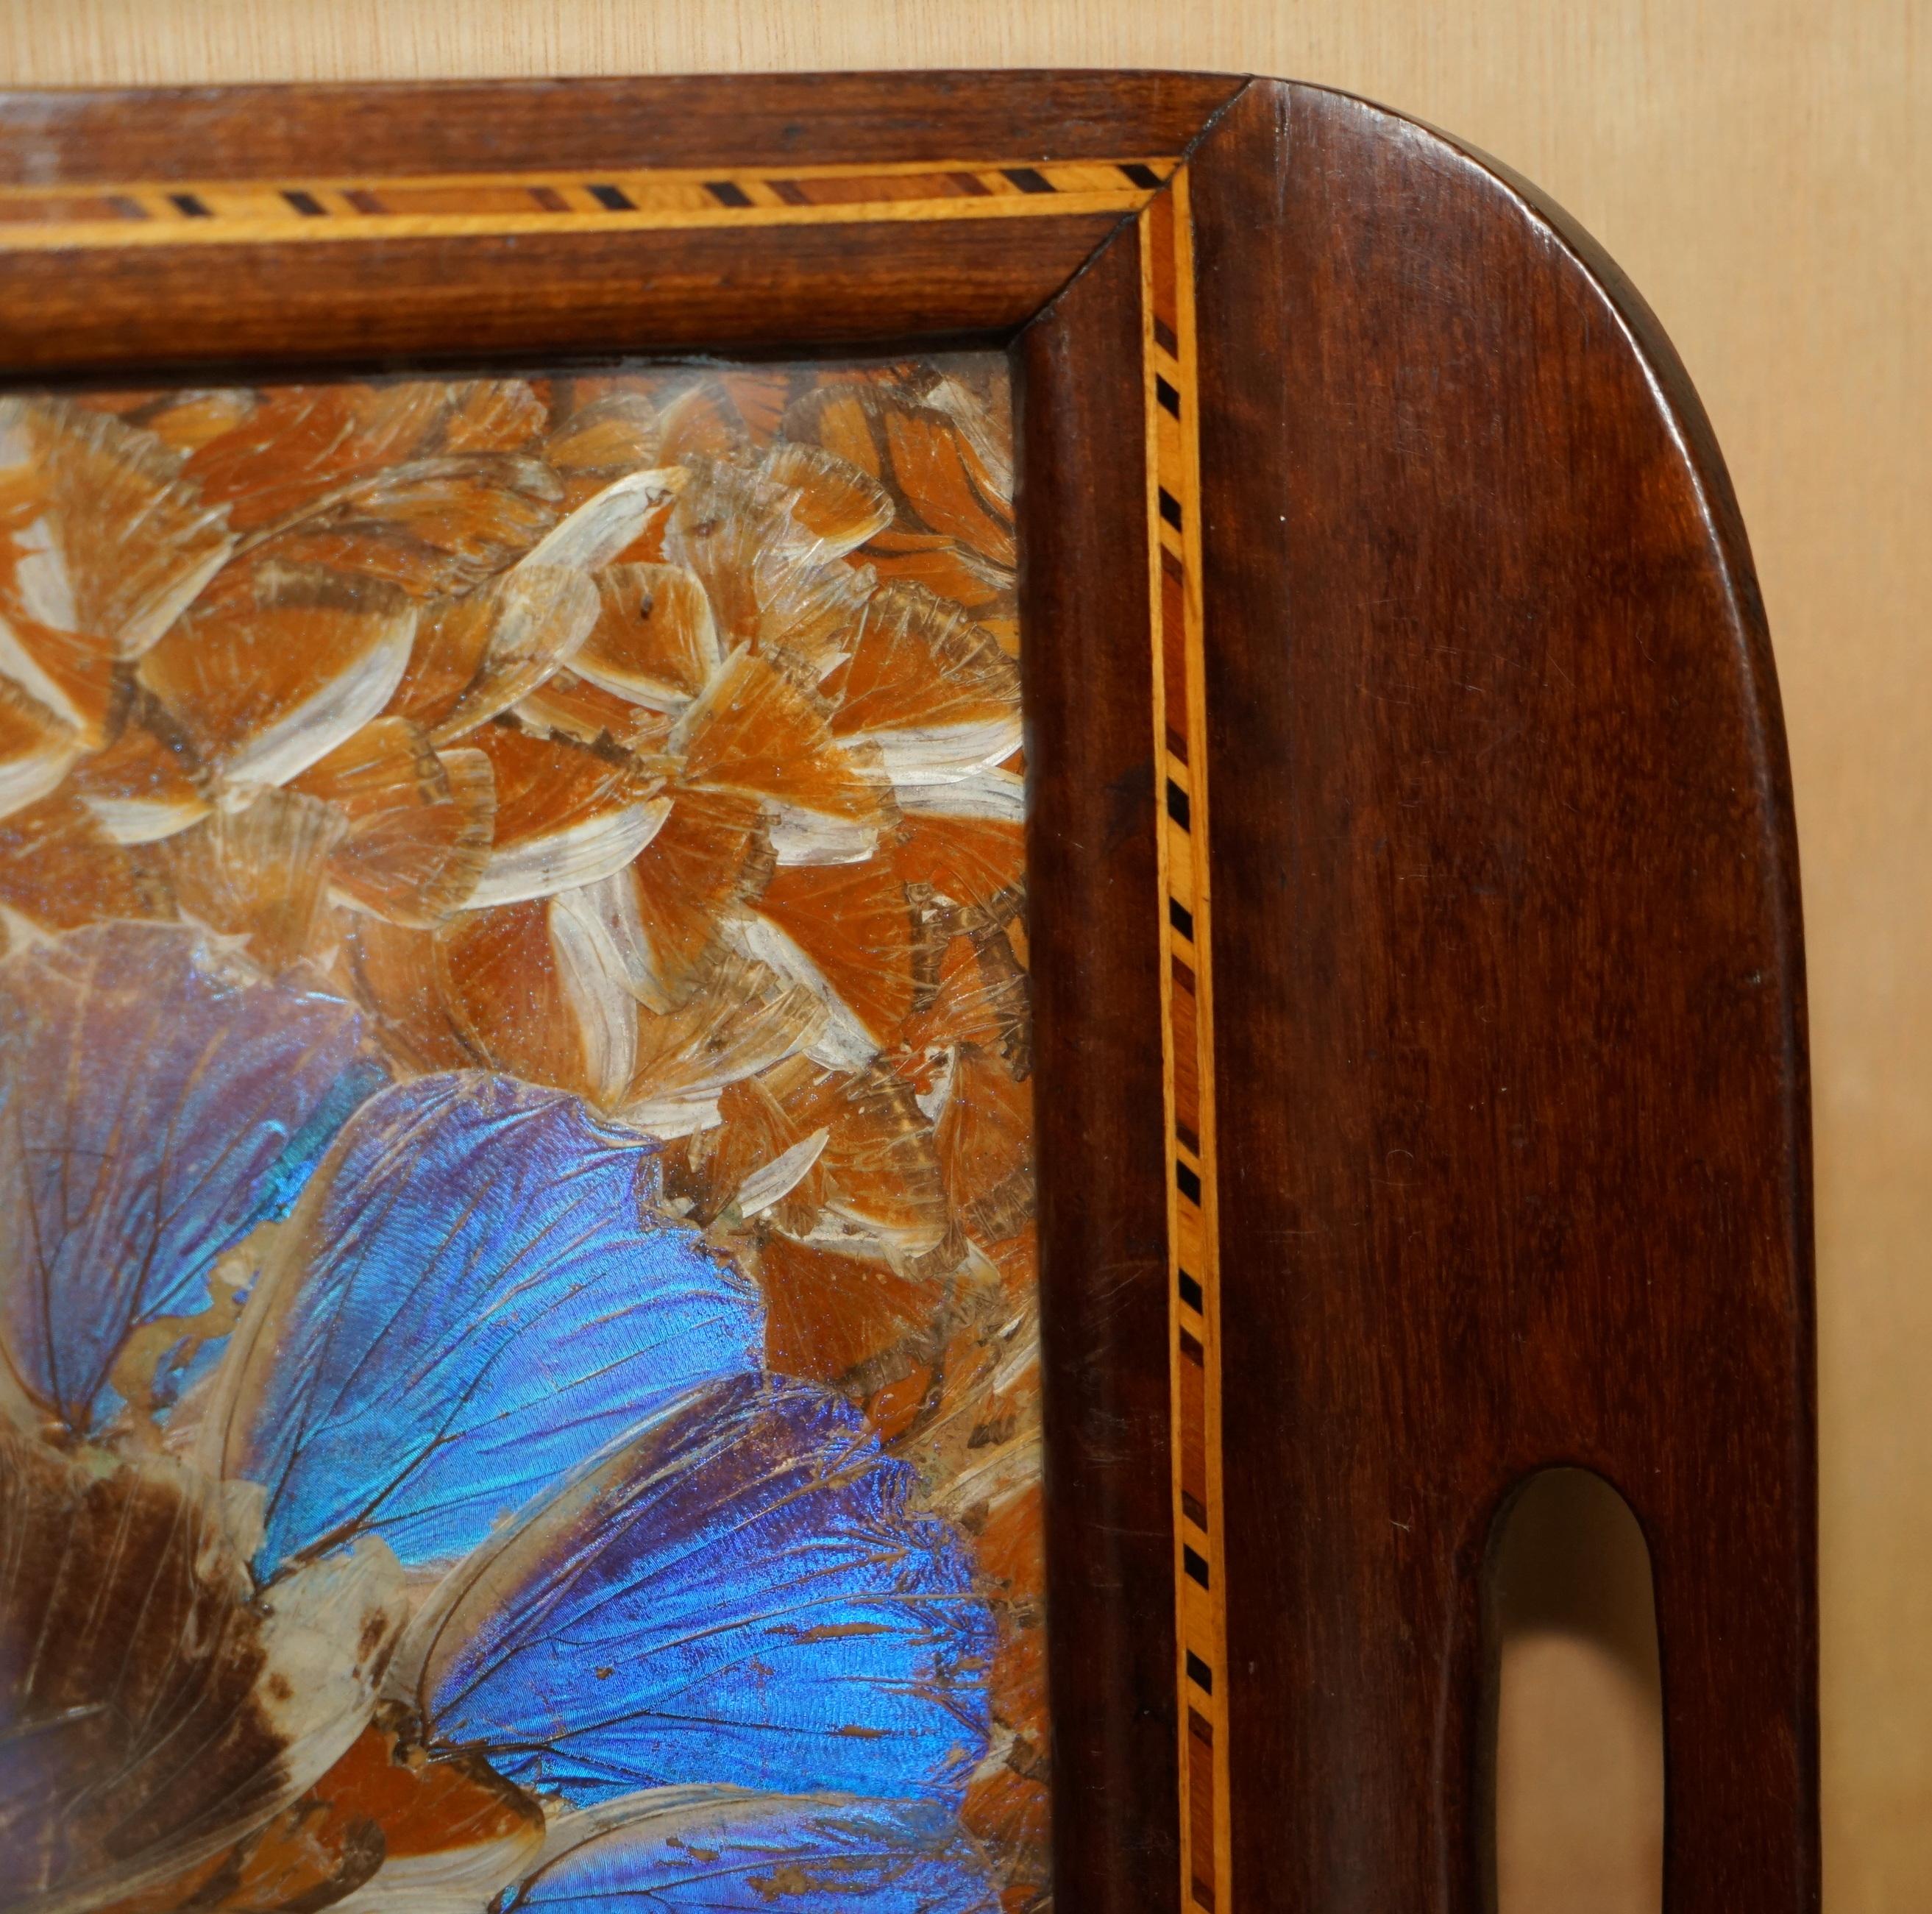 EXQUiSITE RIO DE JANEIRO BRAZILIAN HARDWOOD BUTTERFLY WING BUTLERS SERVING TRAY For Sale 6